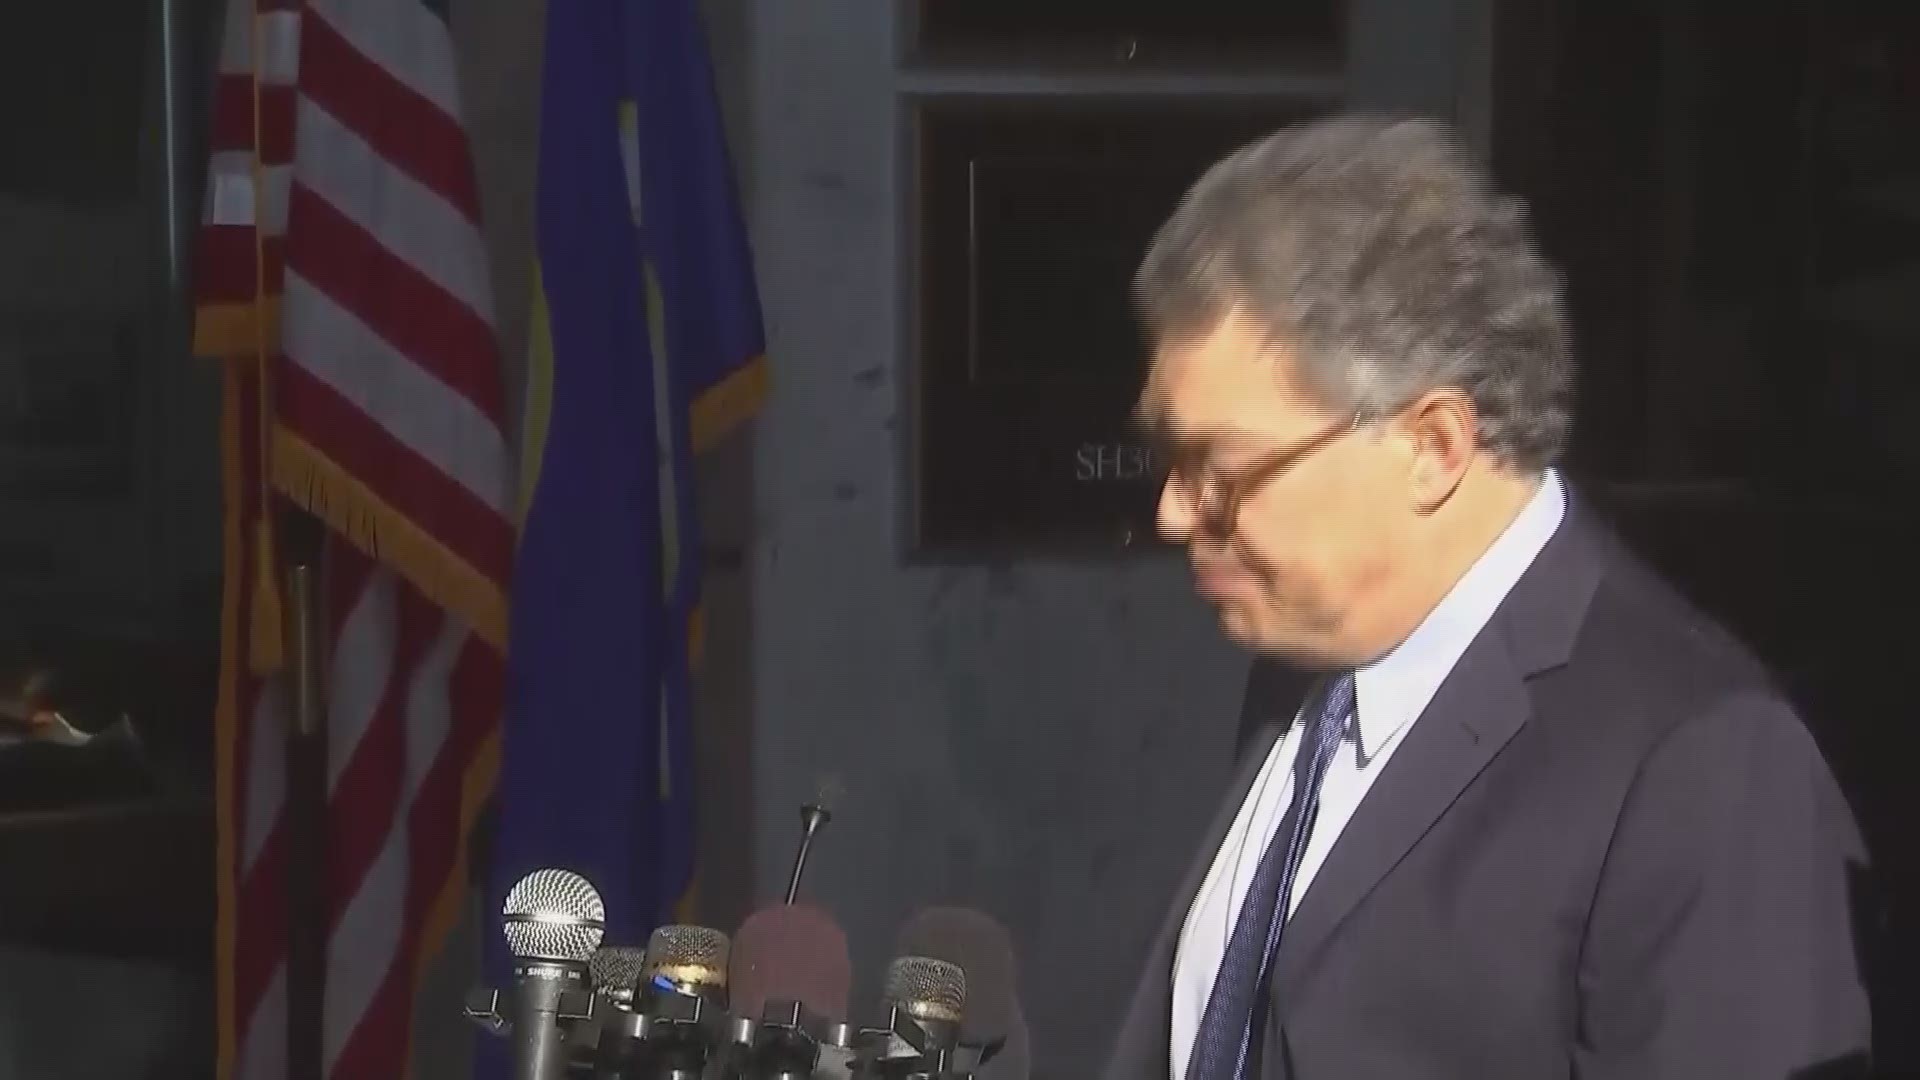 Sen. Al Franken addressed the media on Monday from outside his D.C. office amid accusations of sexually inappropriate behavior.